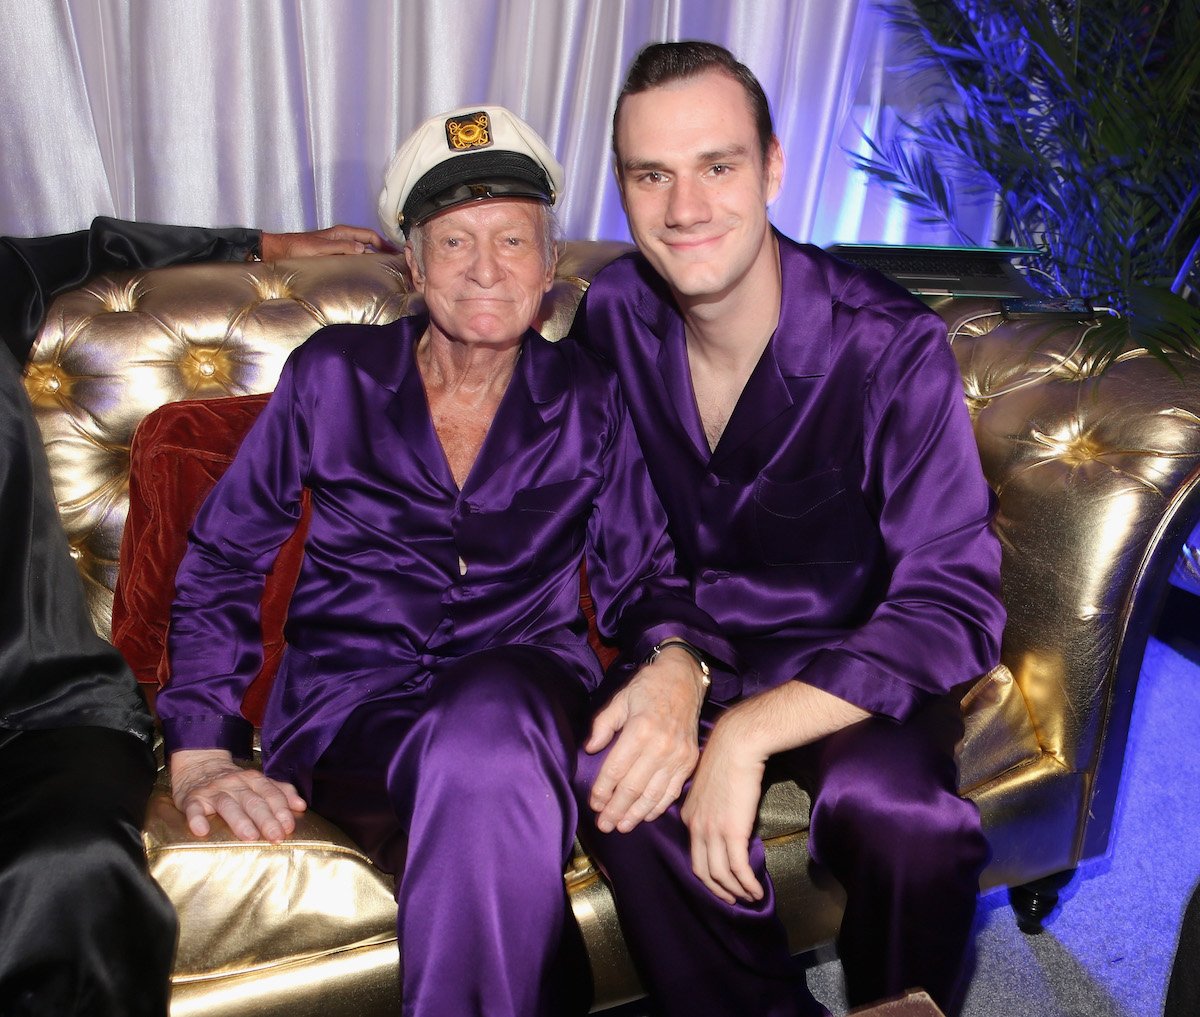 Playboy founder Hugh Hefner and his son Cooper Hefner sit on a couch during a Playboy Mansion party in 2014